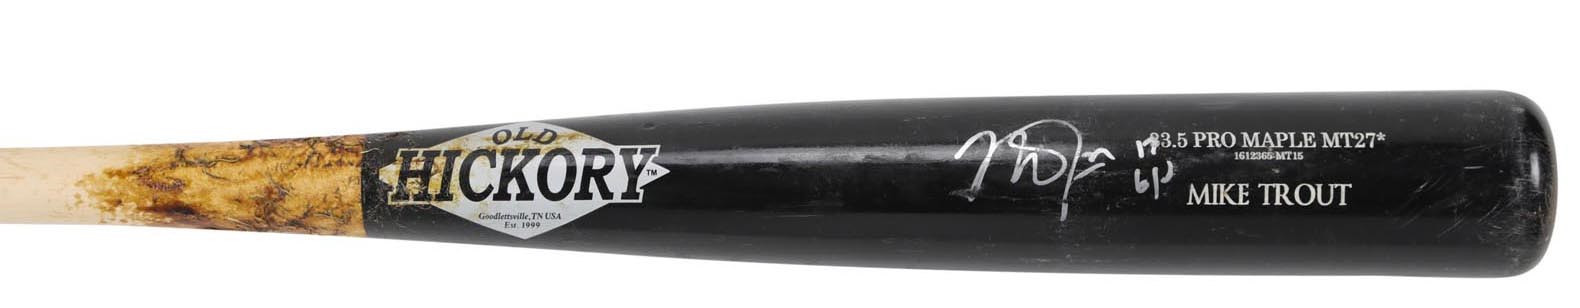 - 2017 Mike Trout Signed Game Used Bat (PSA GU 10 & Anderson Authentics)